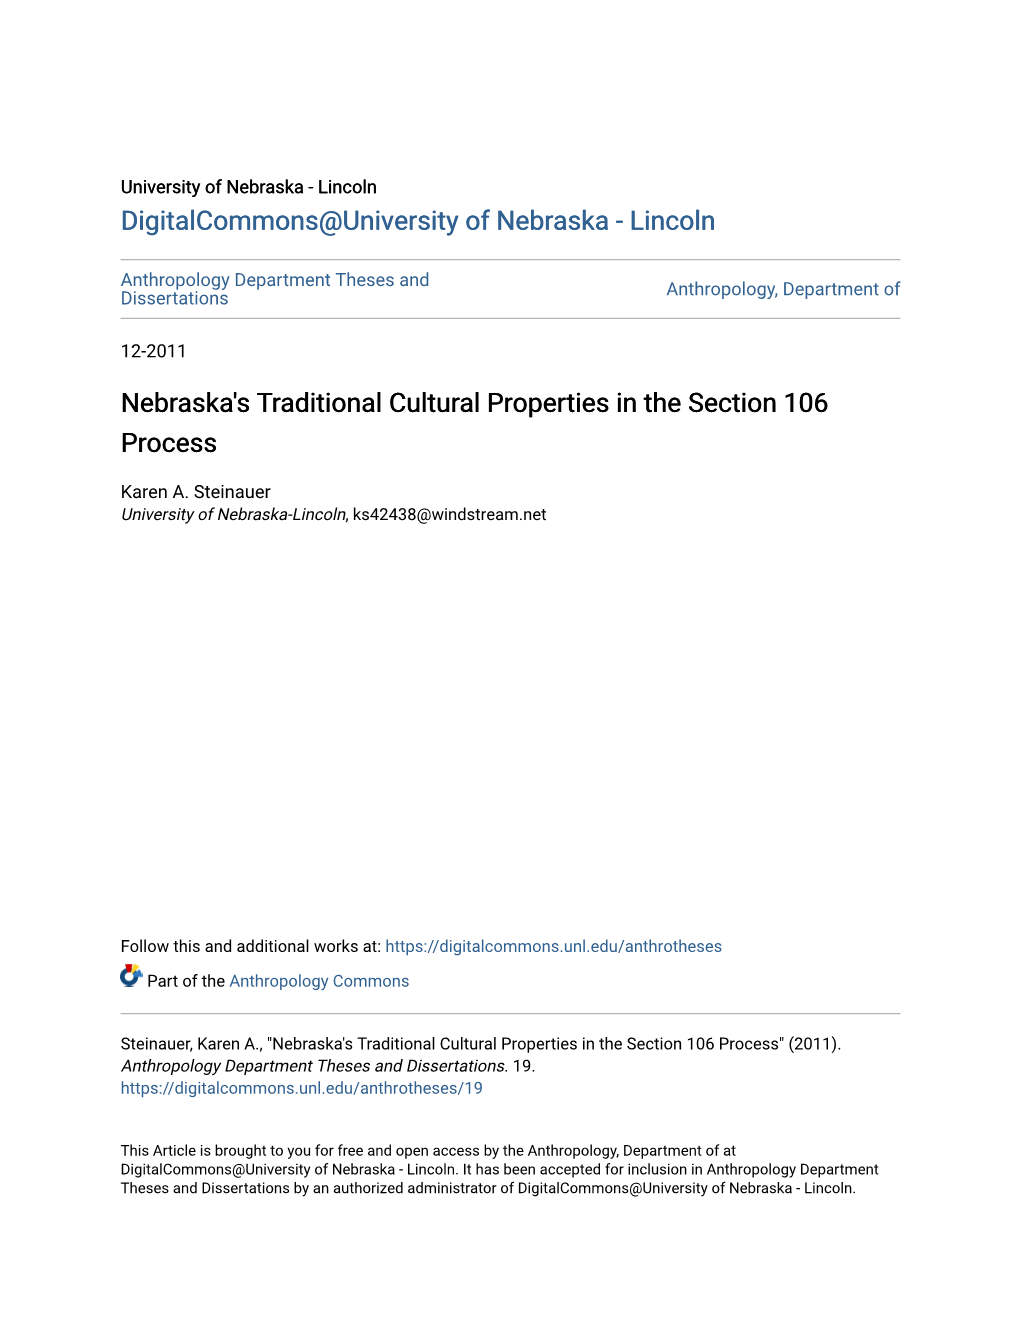 Nebraska's Traditional Cultural Properties in the Section 106 Process